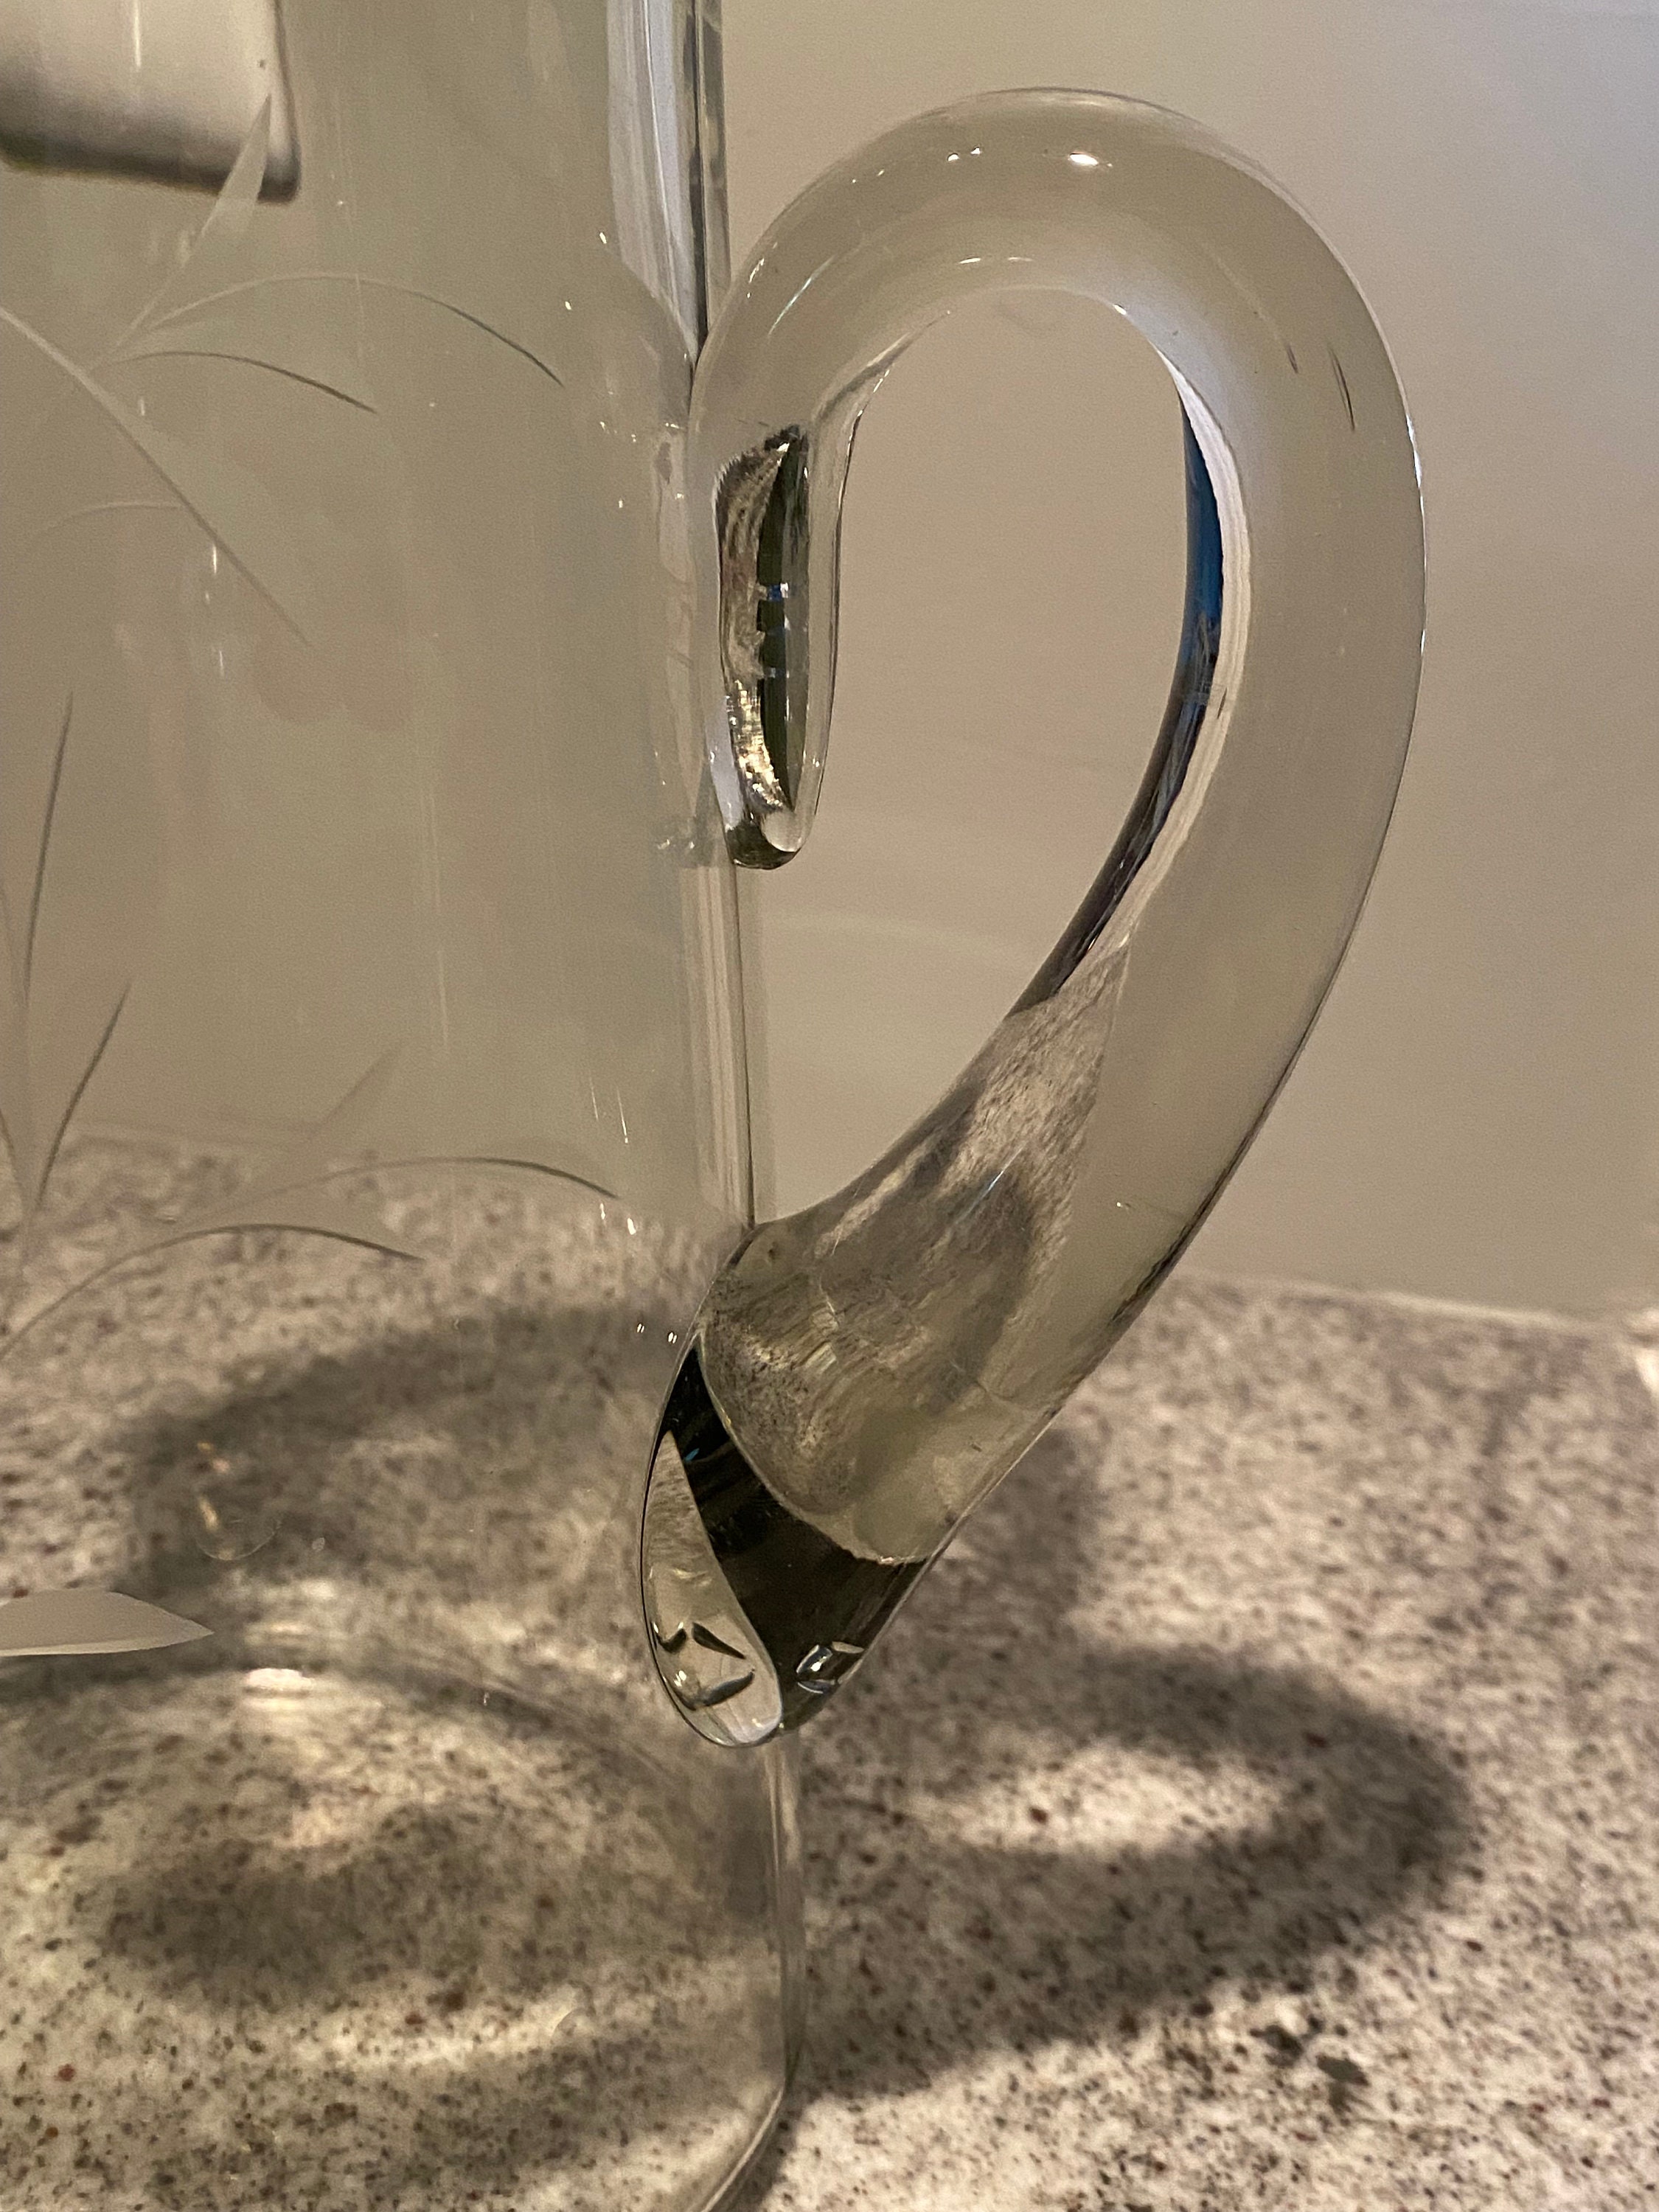 Elegant Clear Glass Pitcher With Crystal-cut Daisy Pattern